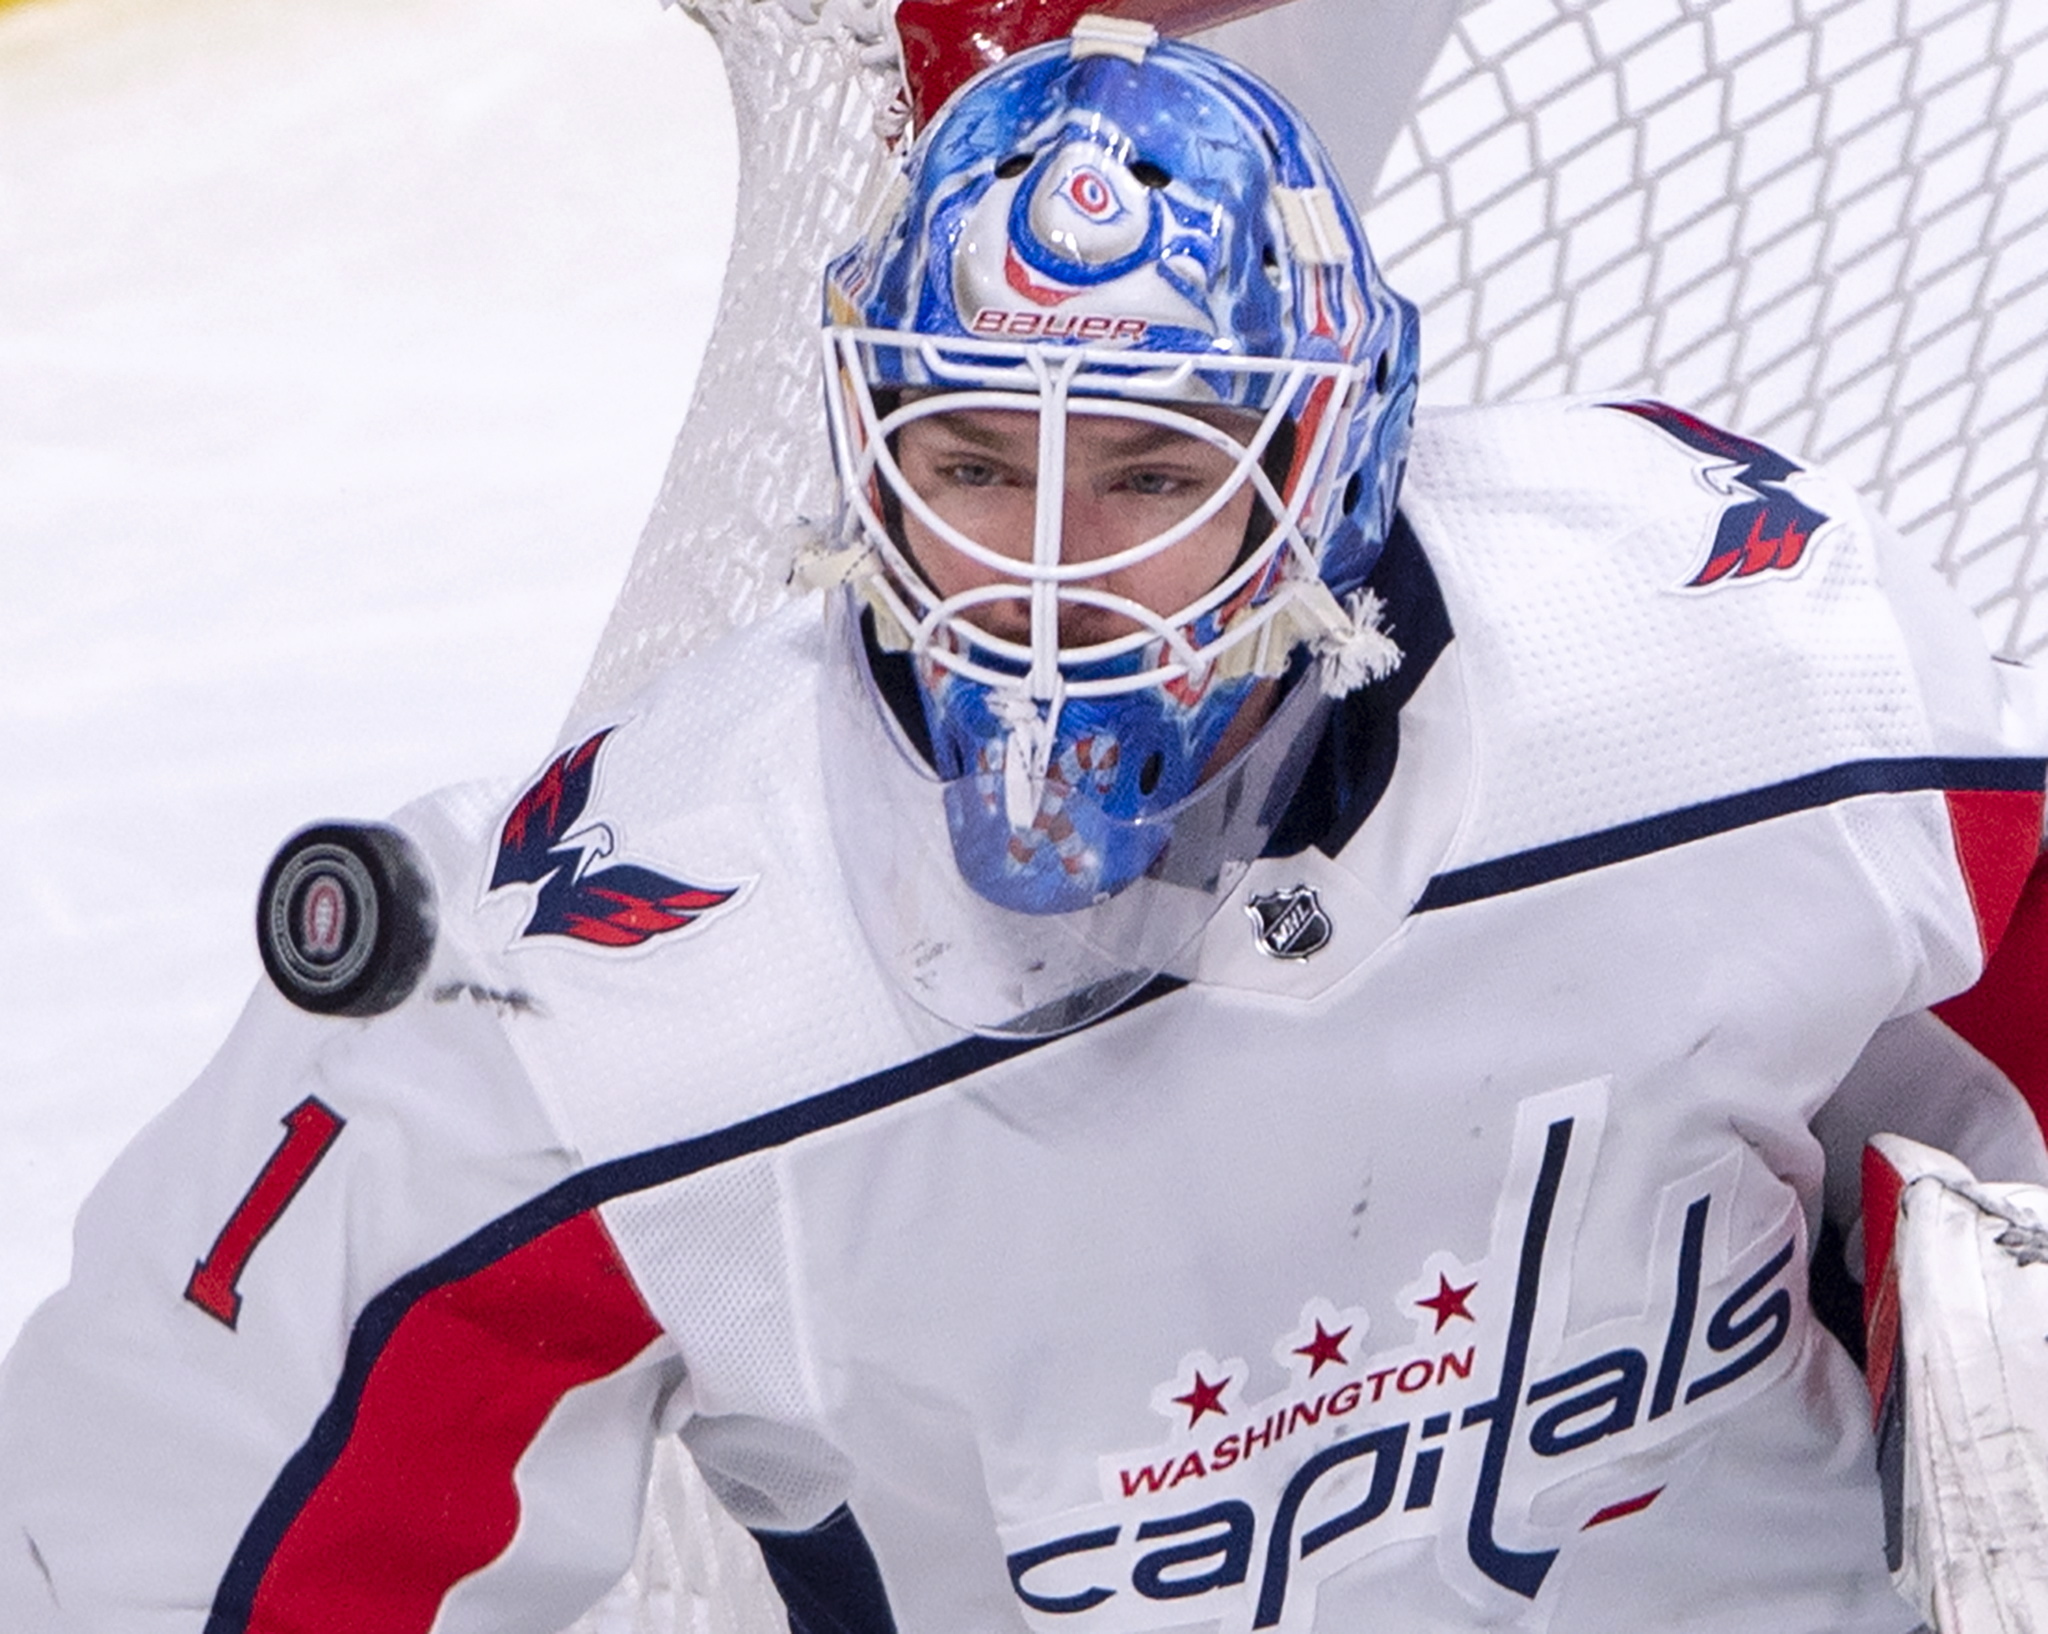 Eller’s overtime goal gives Capitals 5-4 win over Canadiens